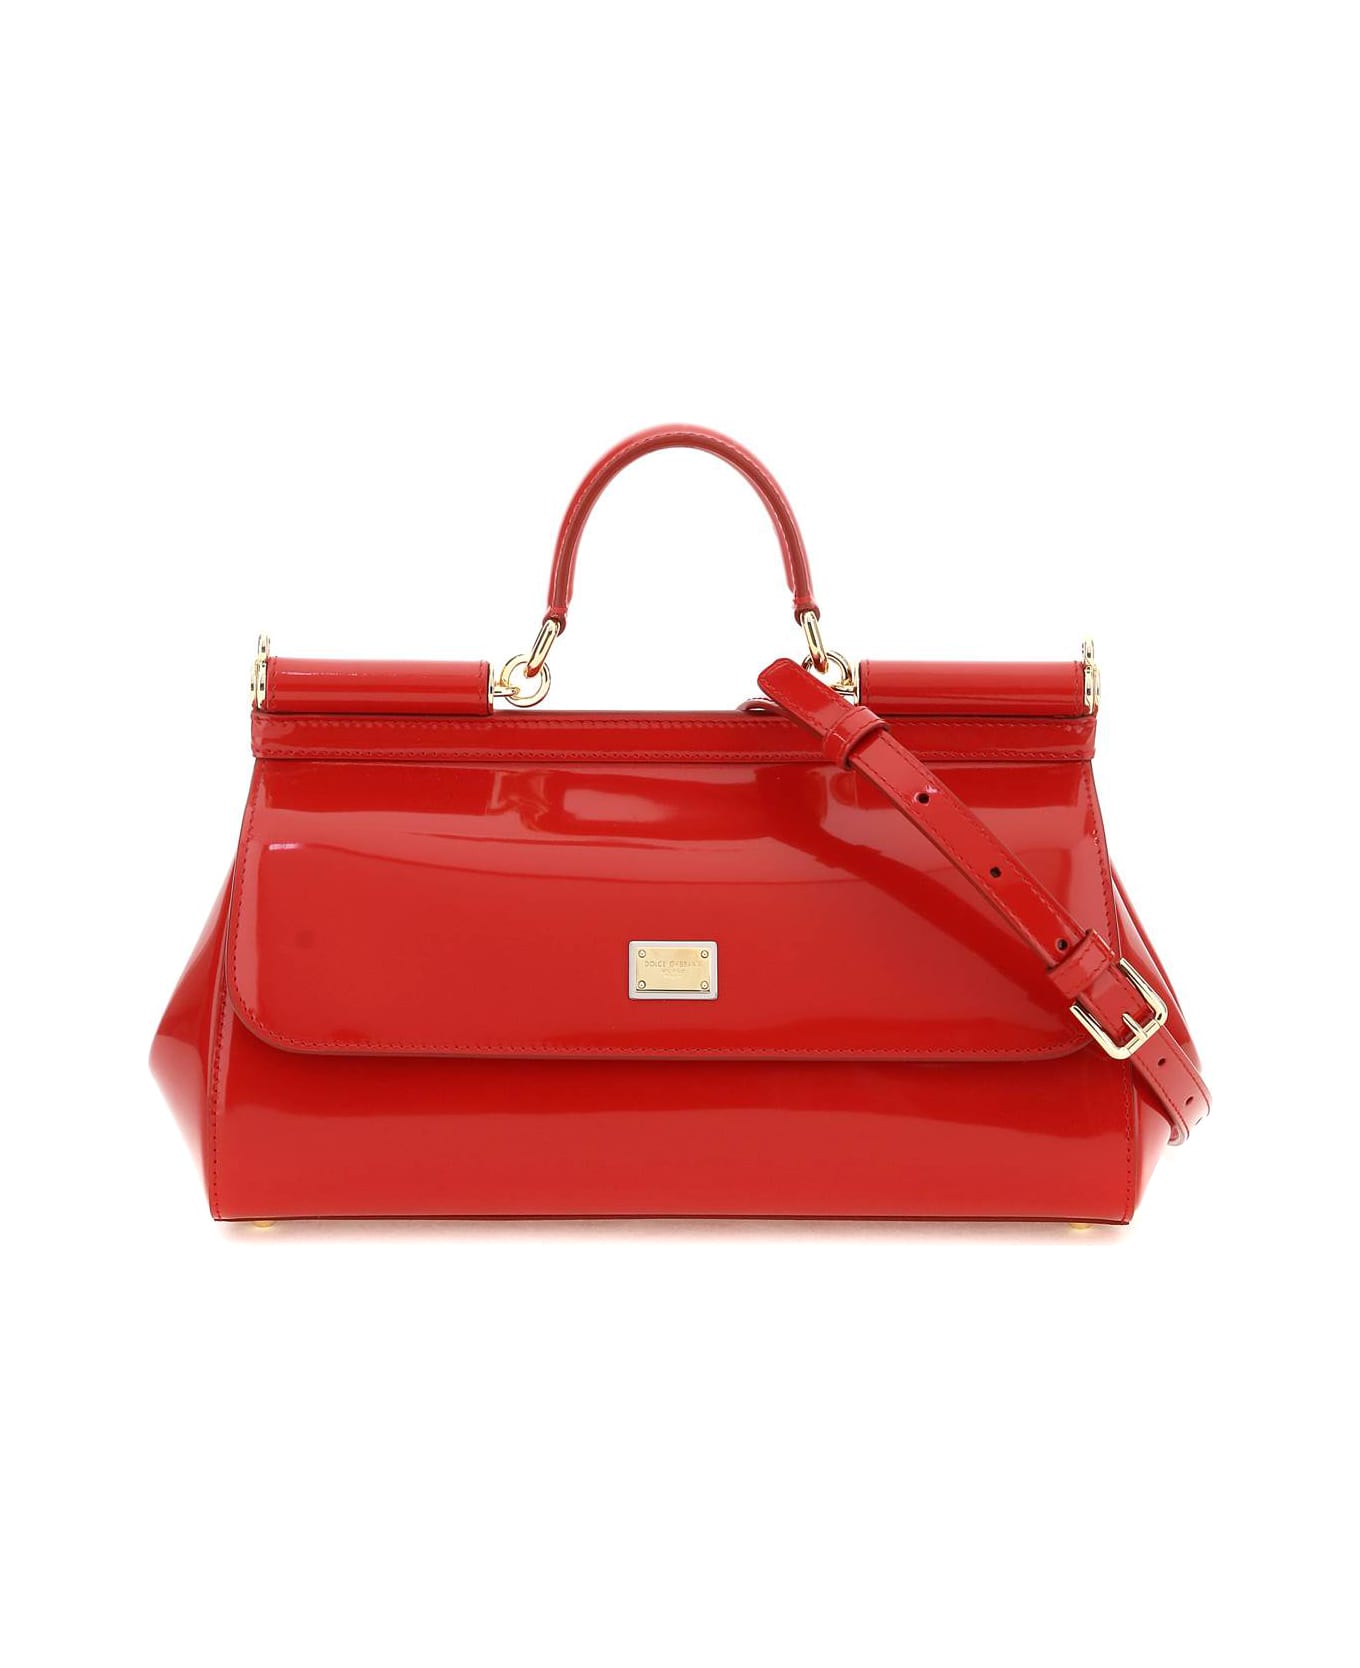 Dolce & Gabbana Patent Leather Medium New Sicily Bag - ROSSO (Red) トートバッグ